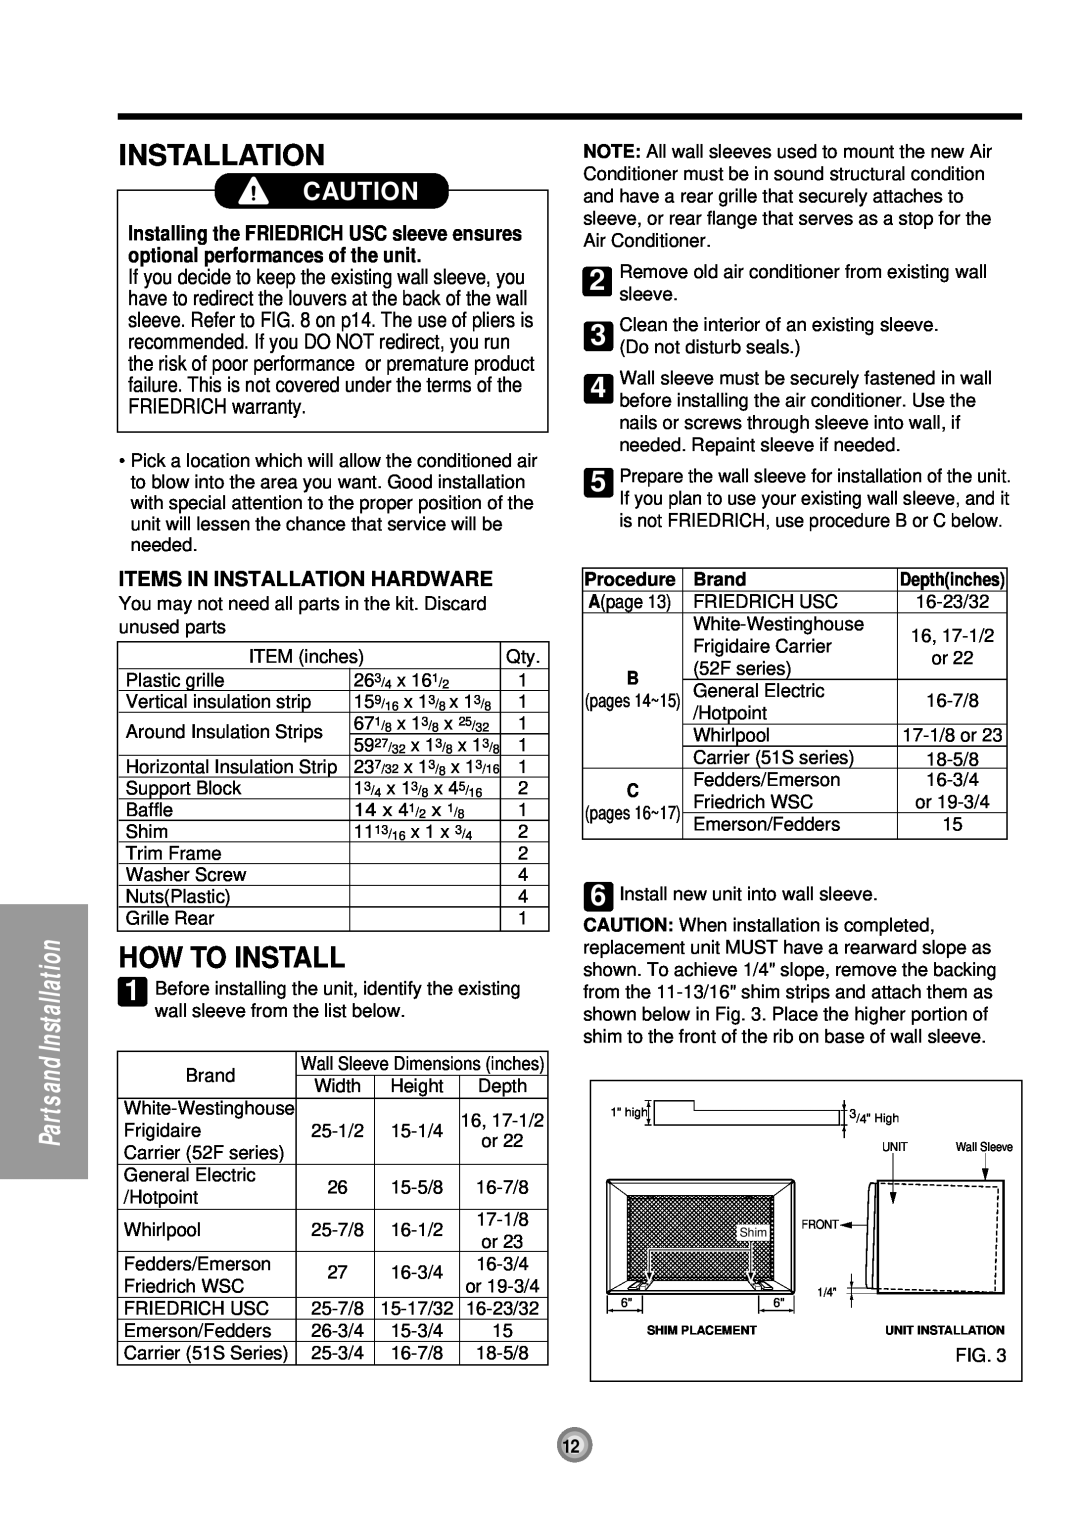 Friedrich US08, US10, US12 manual How To Install, Parts and Installation, Procedure, Brand 